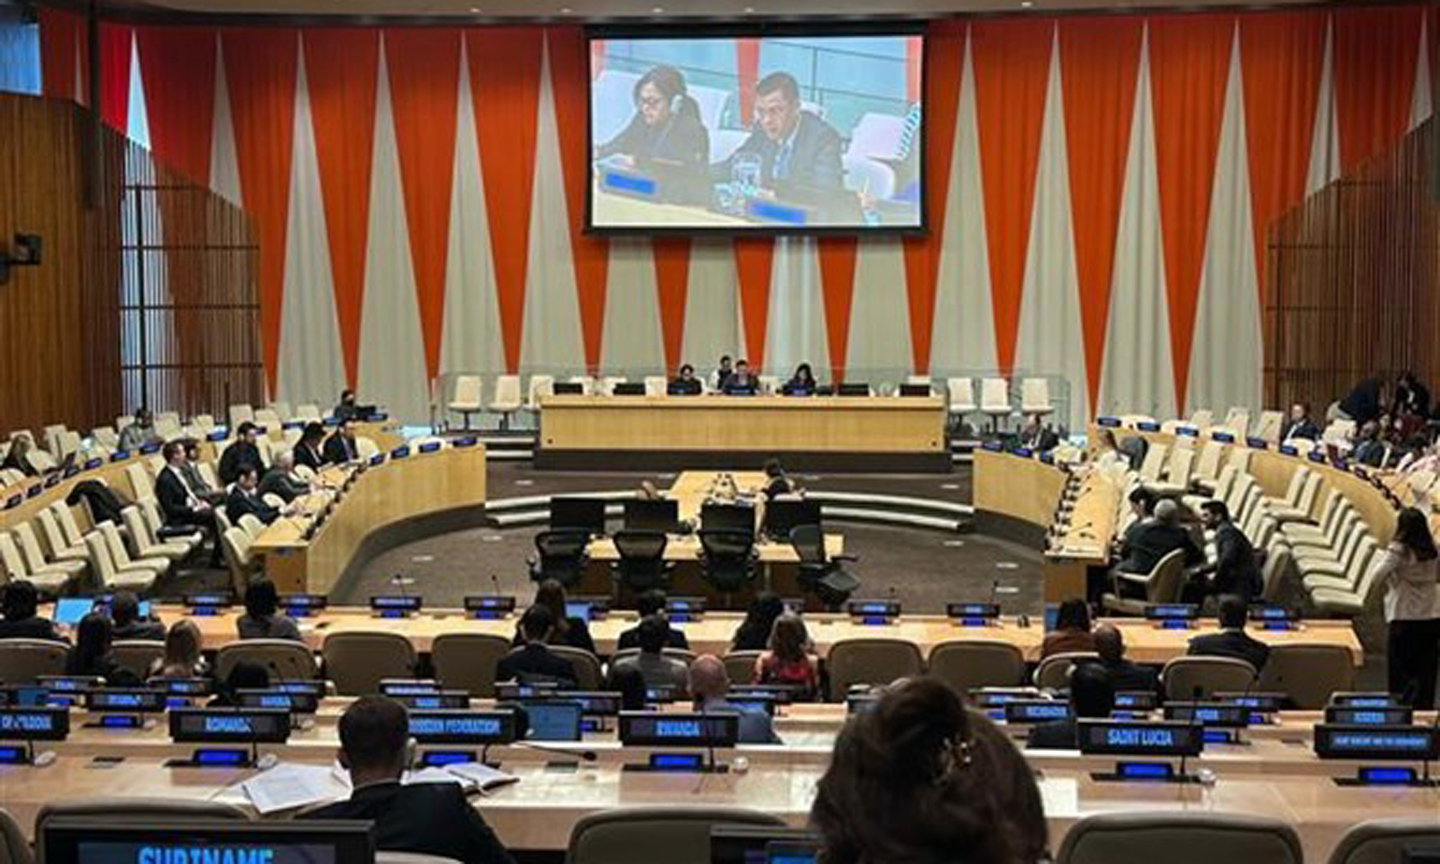 ABO/NDO- Ambassador Dang Hoang Giang , Vietnam’s Permanent Representative to the United Nations (UN), attended a meeting in New York on April 24 to celebrate the International Mother Earth Day, as Vice President of the 77th session of the UN General Assembly (UNGA 77).